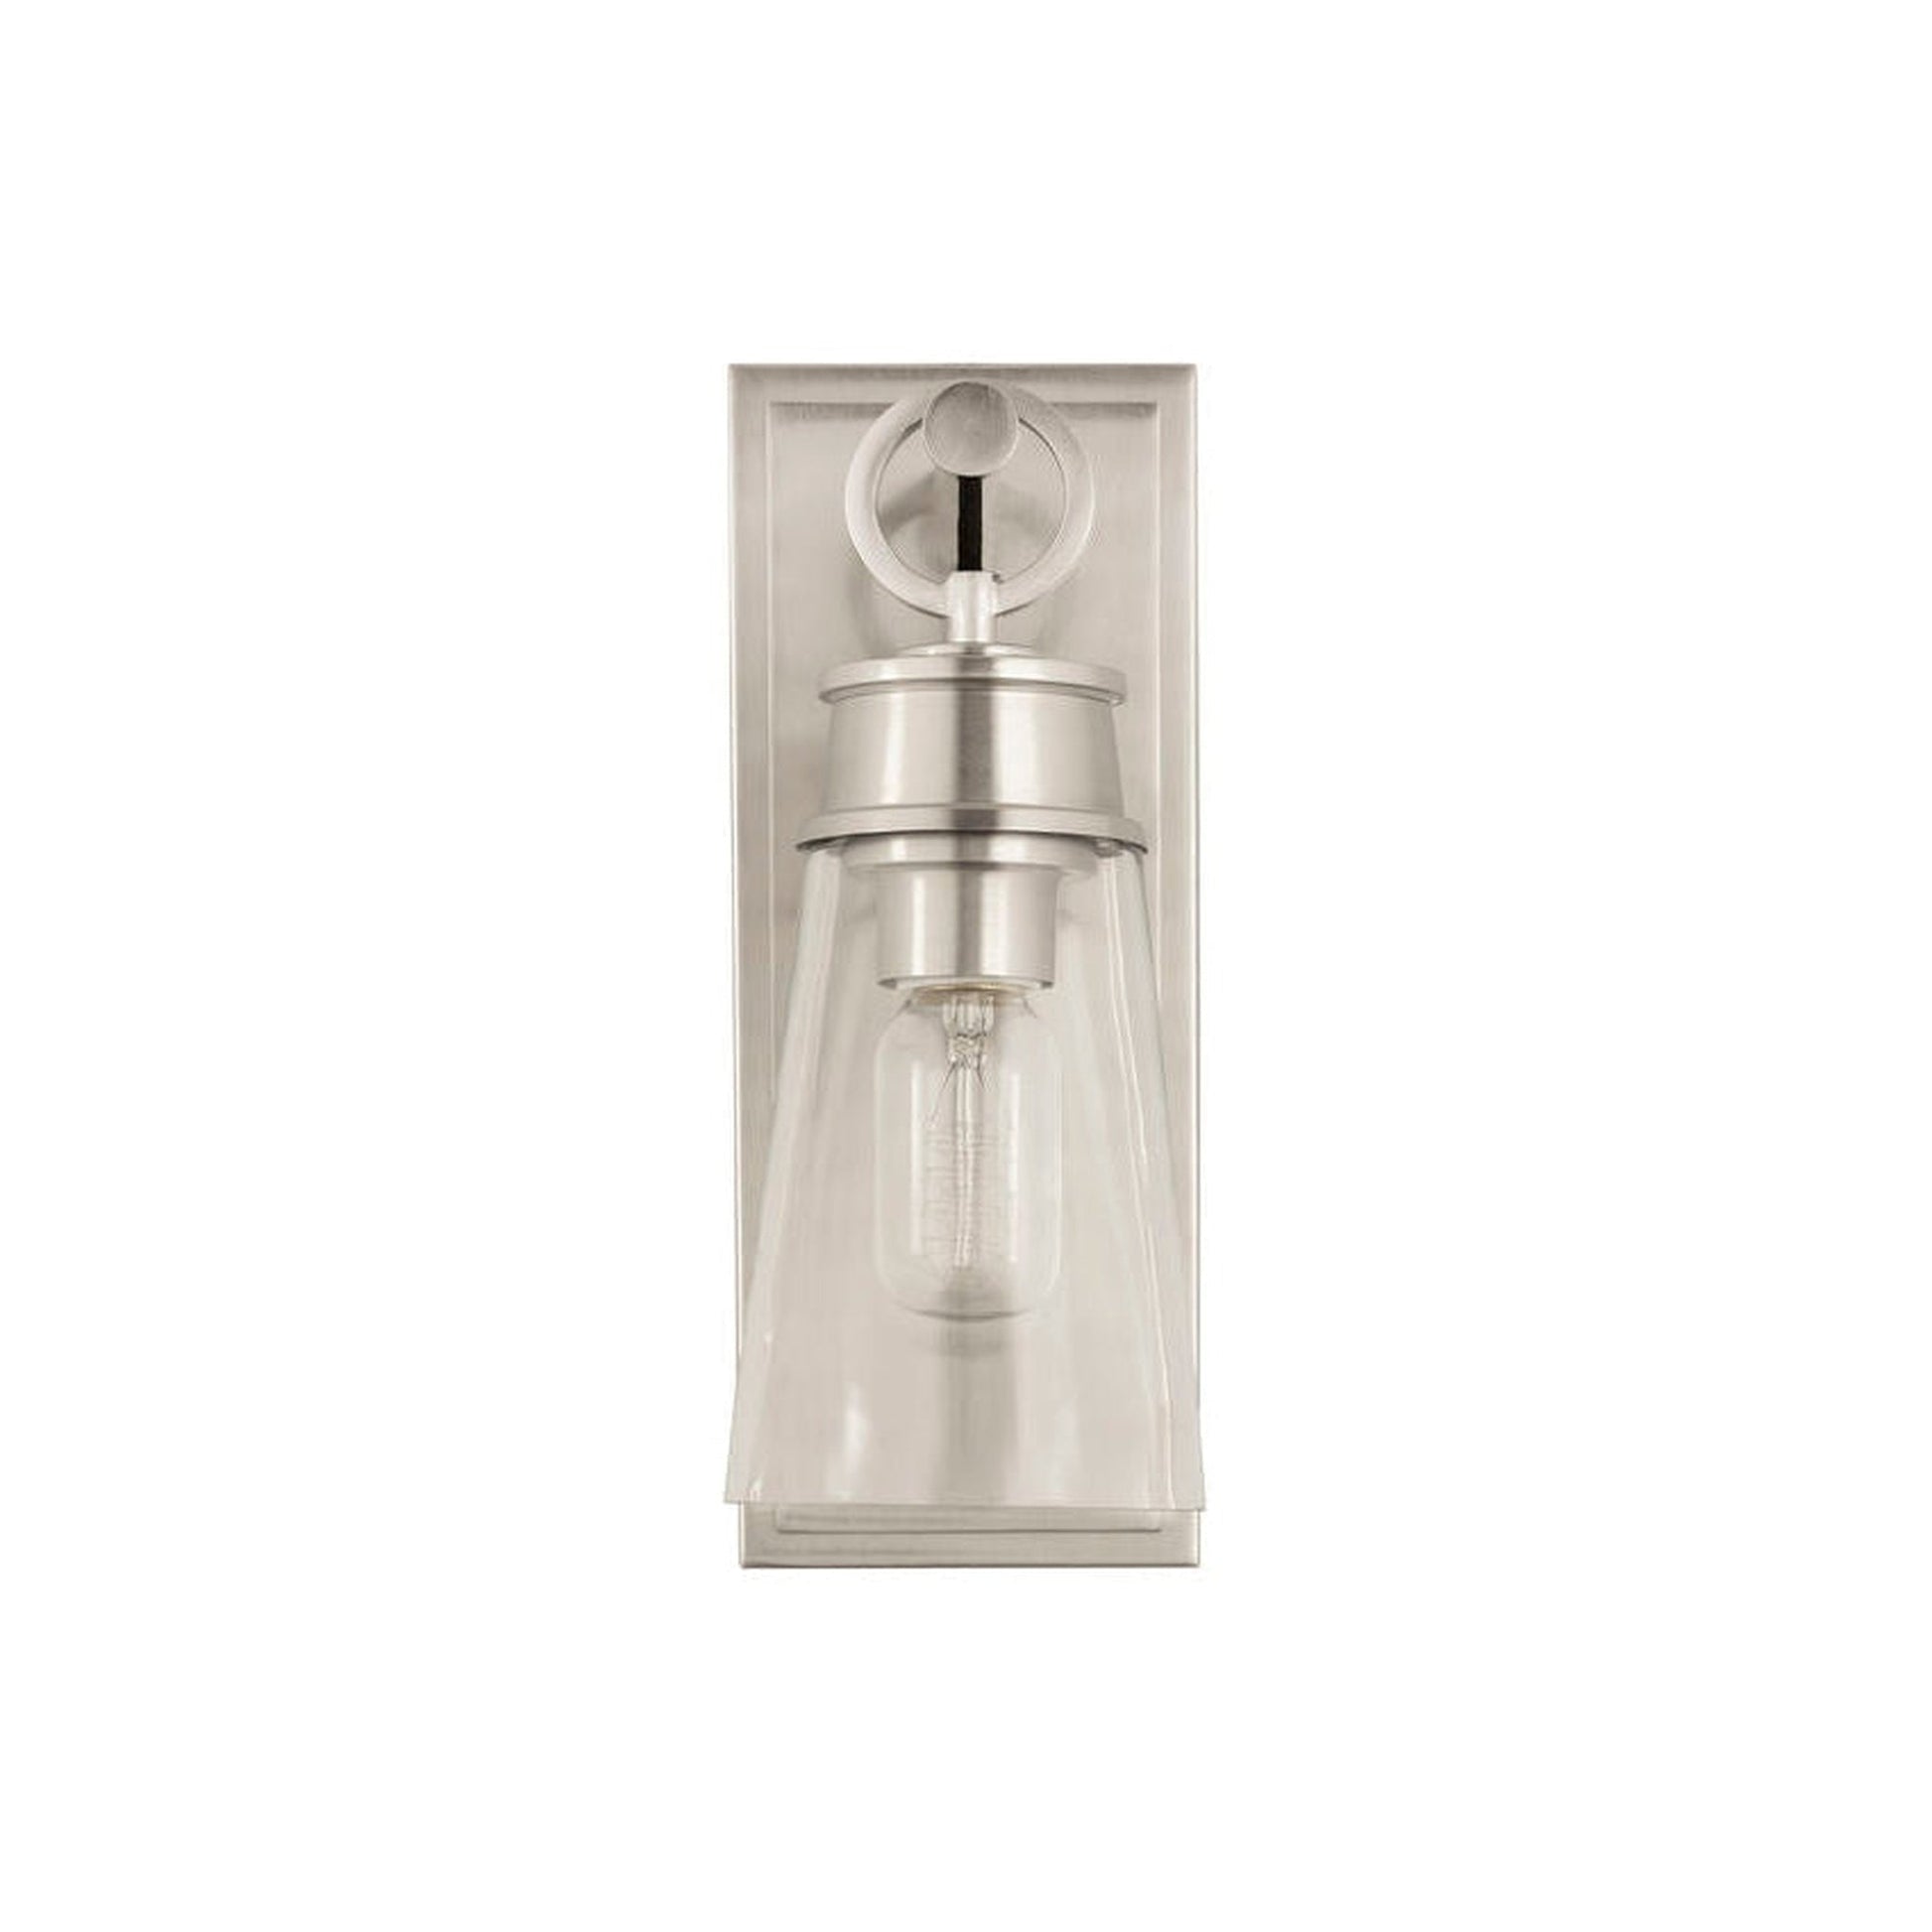 Z-Lite Wentworth 5" 1-Light Brushed Nickel Wall Sconce With Clear Glass Shade